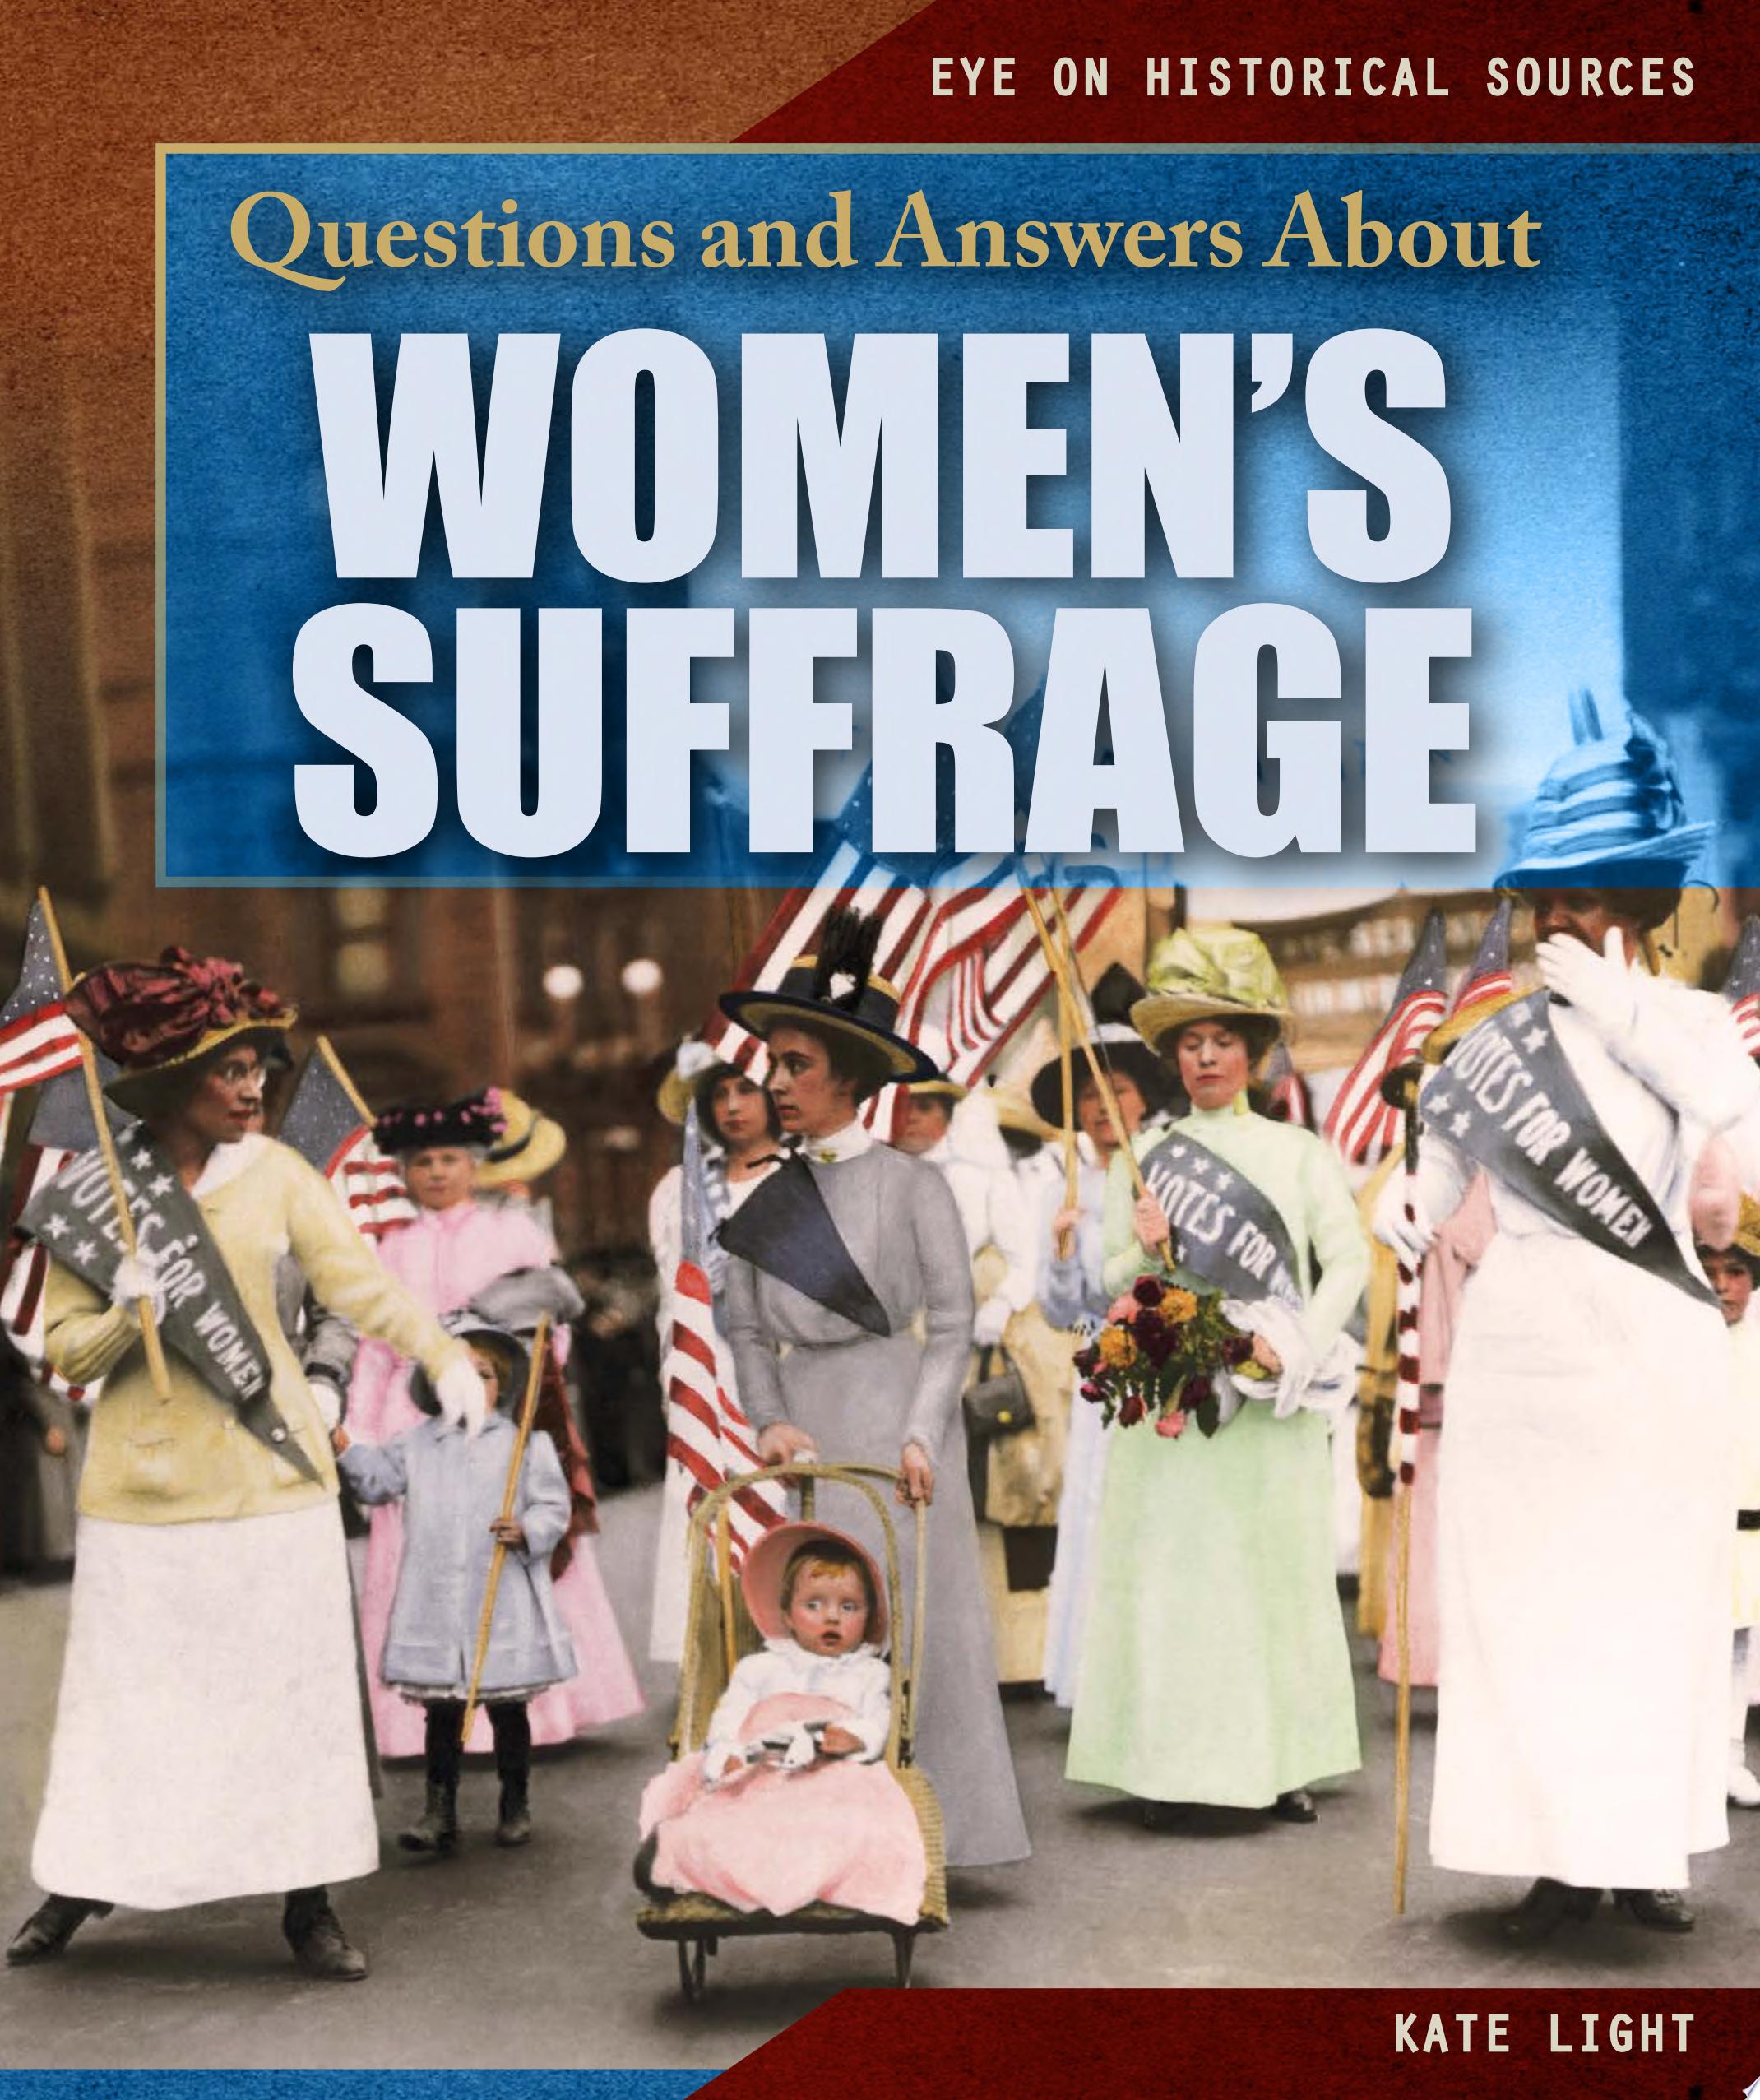 Image for "Questions and Answers About Women’s Suffrage"